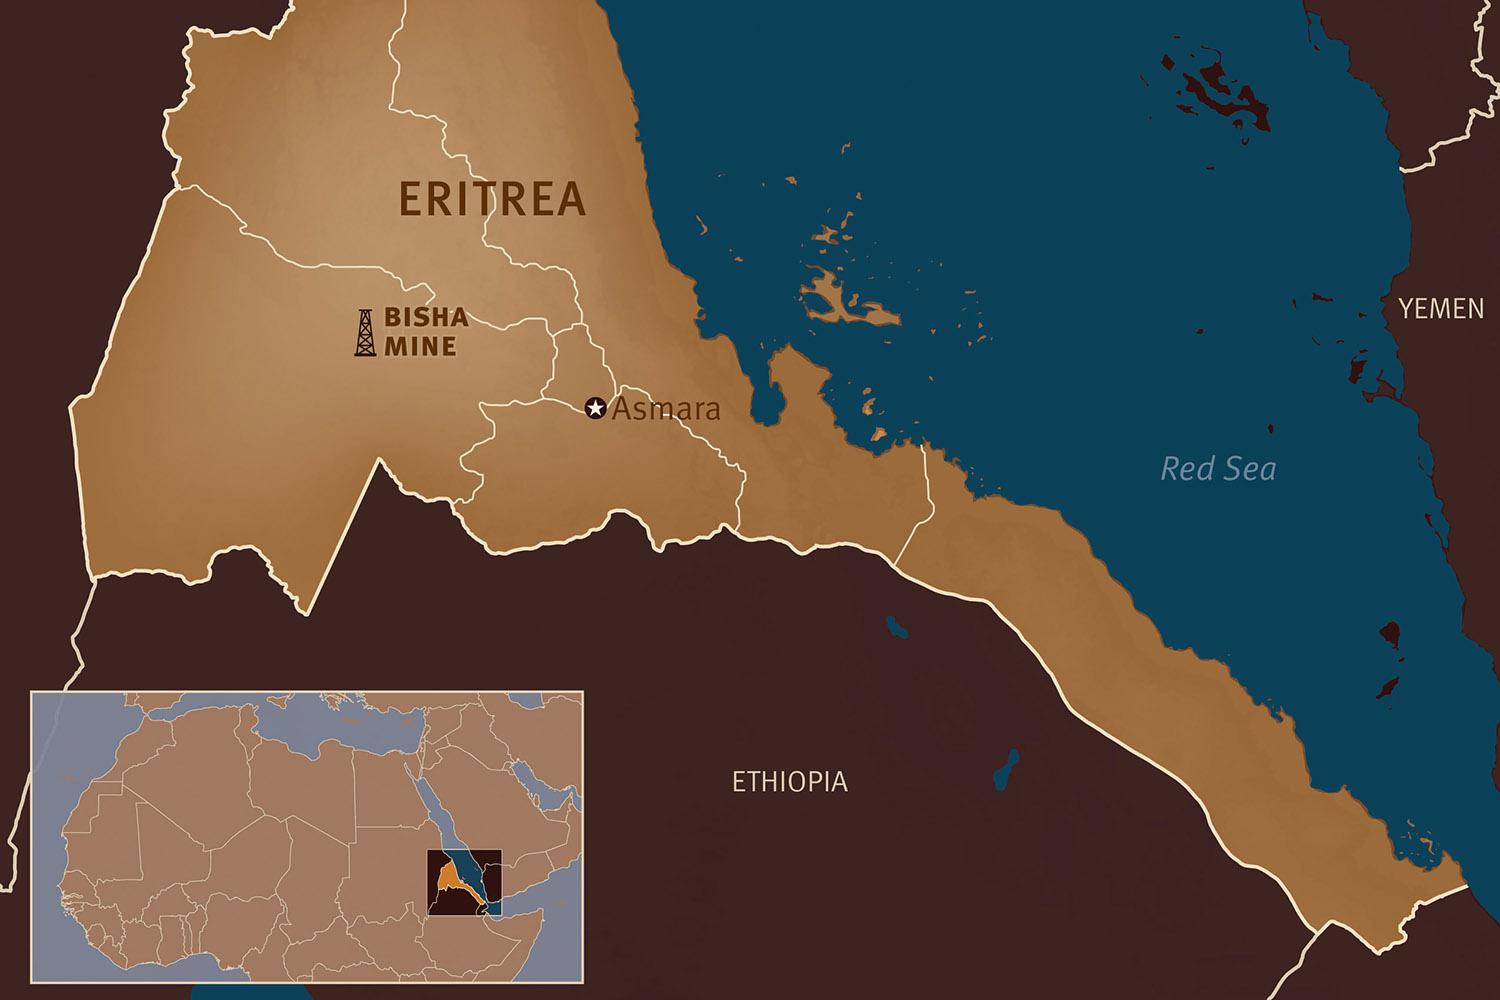 Human Rights Abuses of Eritreans, At Home and Abroad